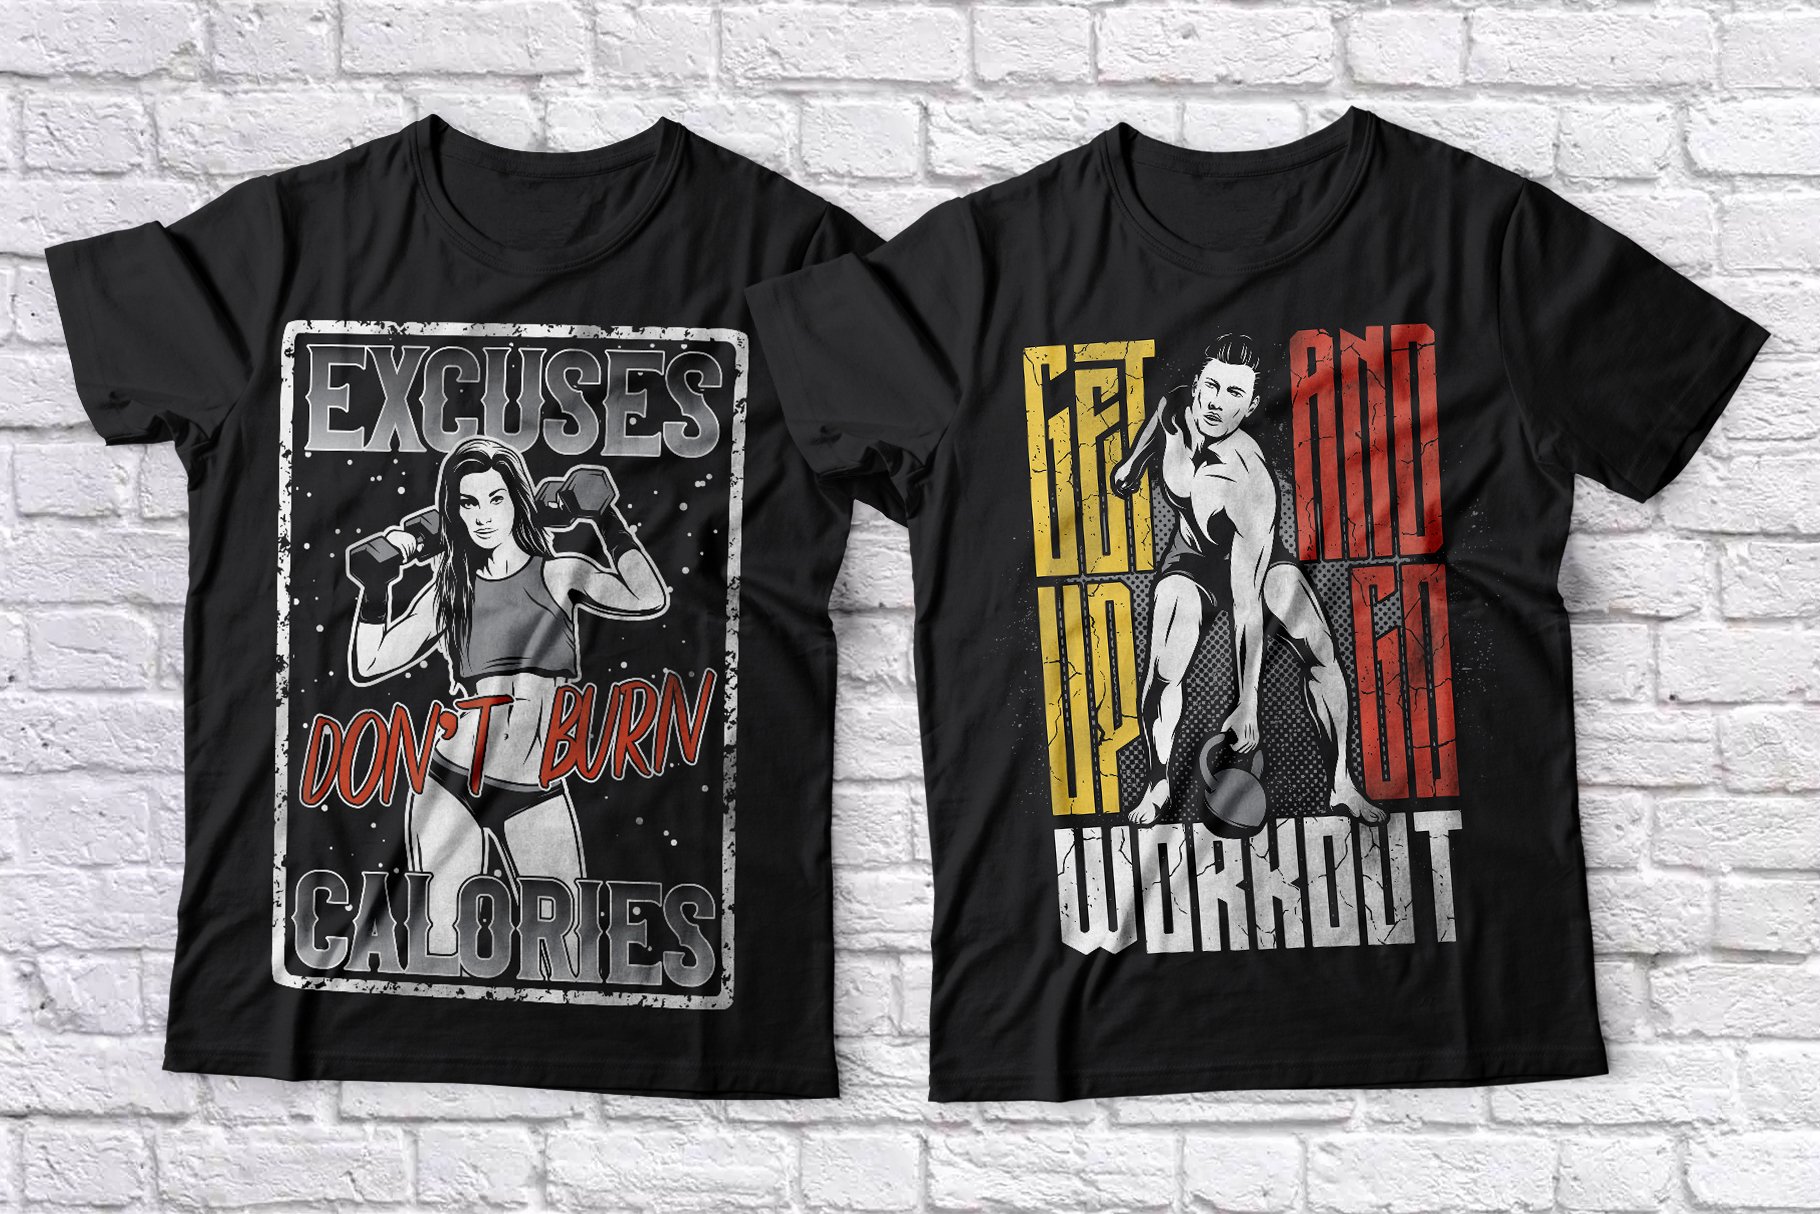 A set of black t-shirts in black with a charming print for men and women working out in the gym.